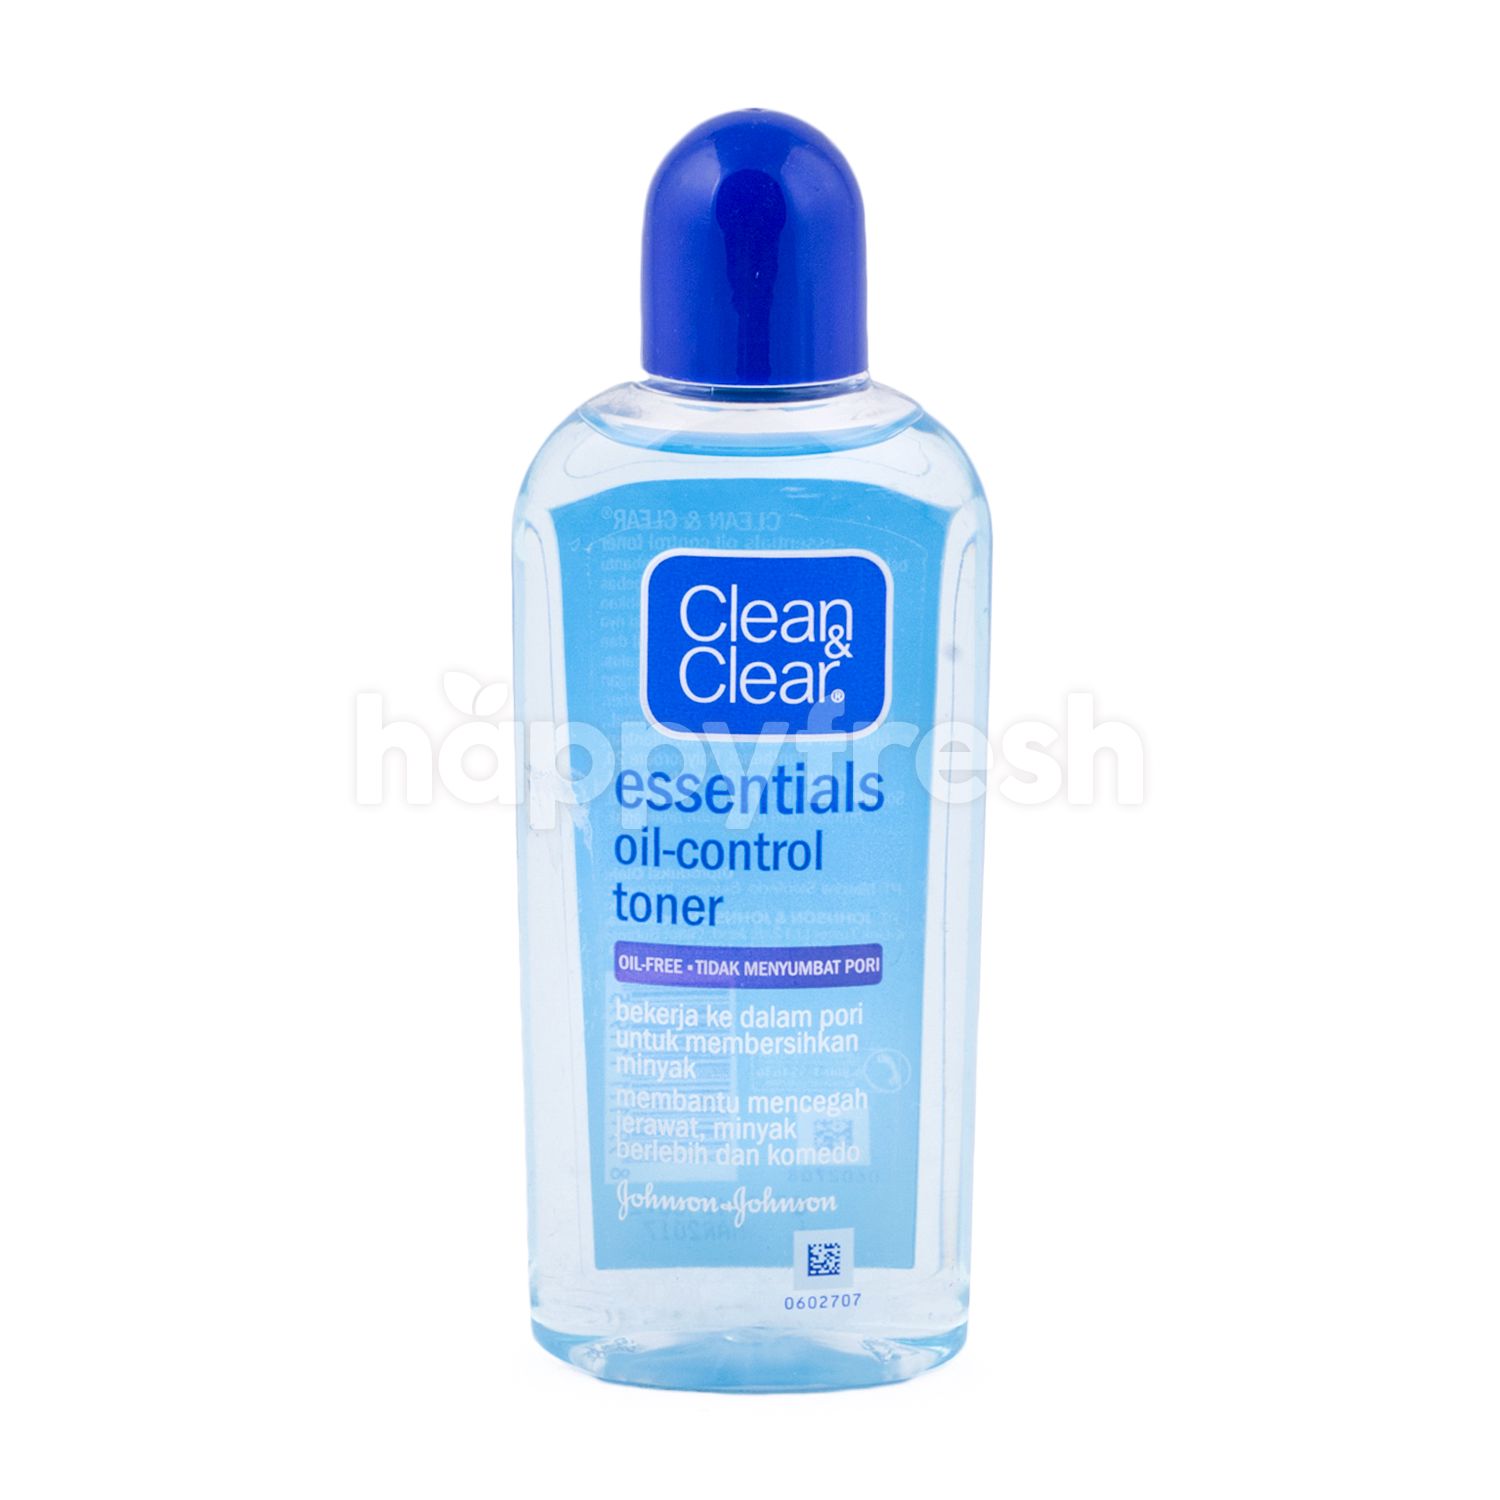 Clear control. Clean and Clear Oil Control Toner.